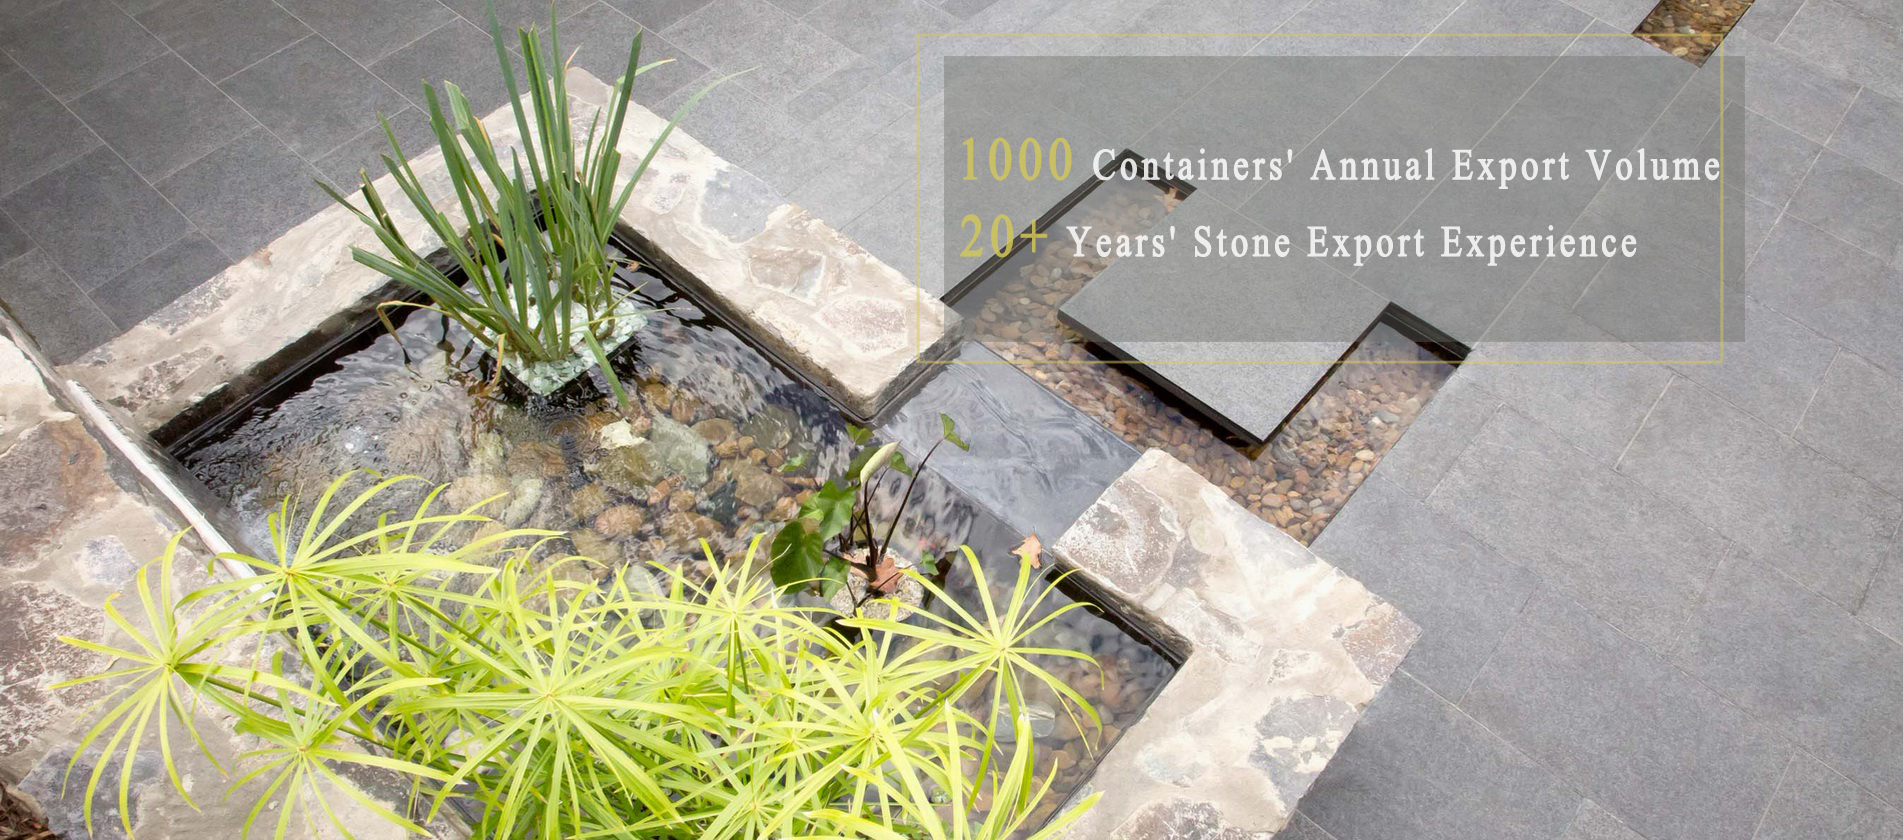 Artificial Stone Manufacturers